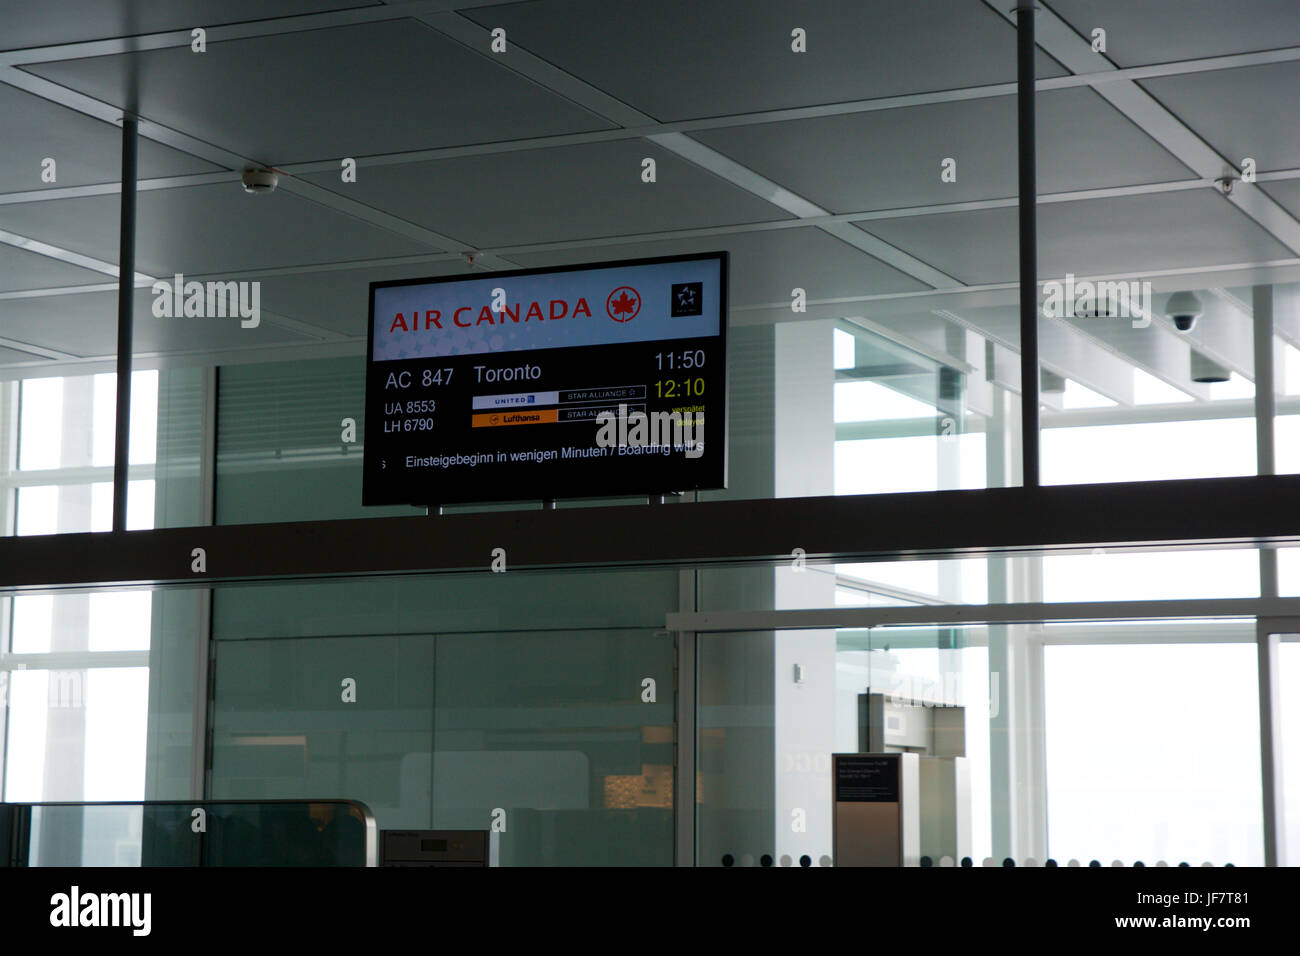 MUNICH, GERMANY - JAN 21st, 2017: Air Canada Boarding Gate at MUC airport for my Business Class flight to Toronto, depature screen Stock Photo